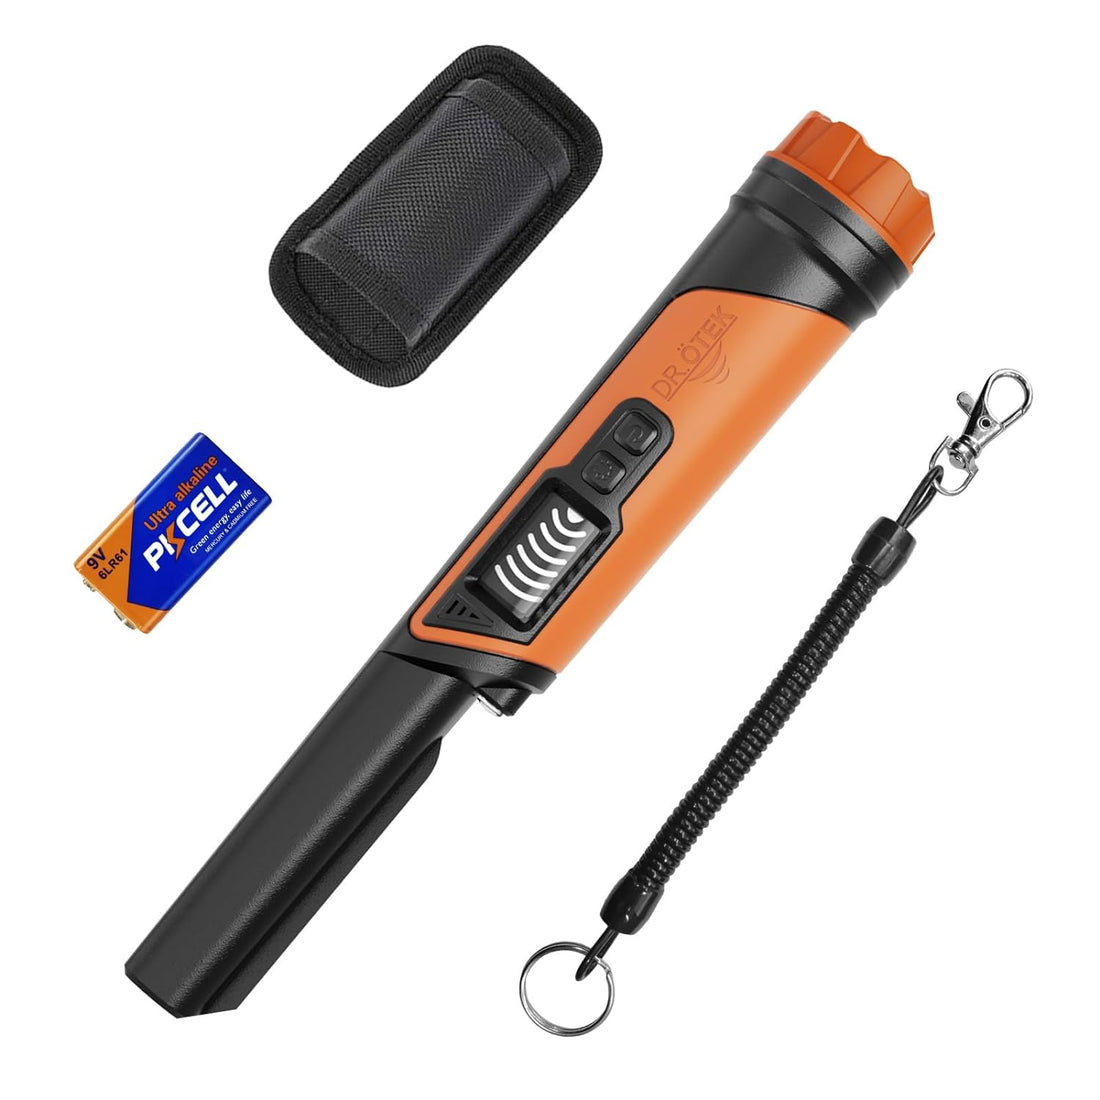 DR.ÖTEK Metal Detector Pinpointer IP68 Fully Waterproof Underwater Handheld Pin Pointer Wand, LCD Screen, Small Metal Detector for Adults, High Accuracy, 3 Alert Modes, for Gold, Relics - Orange